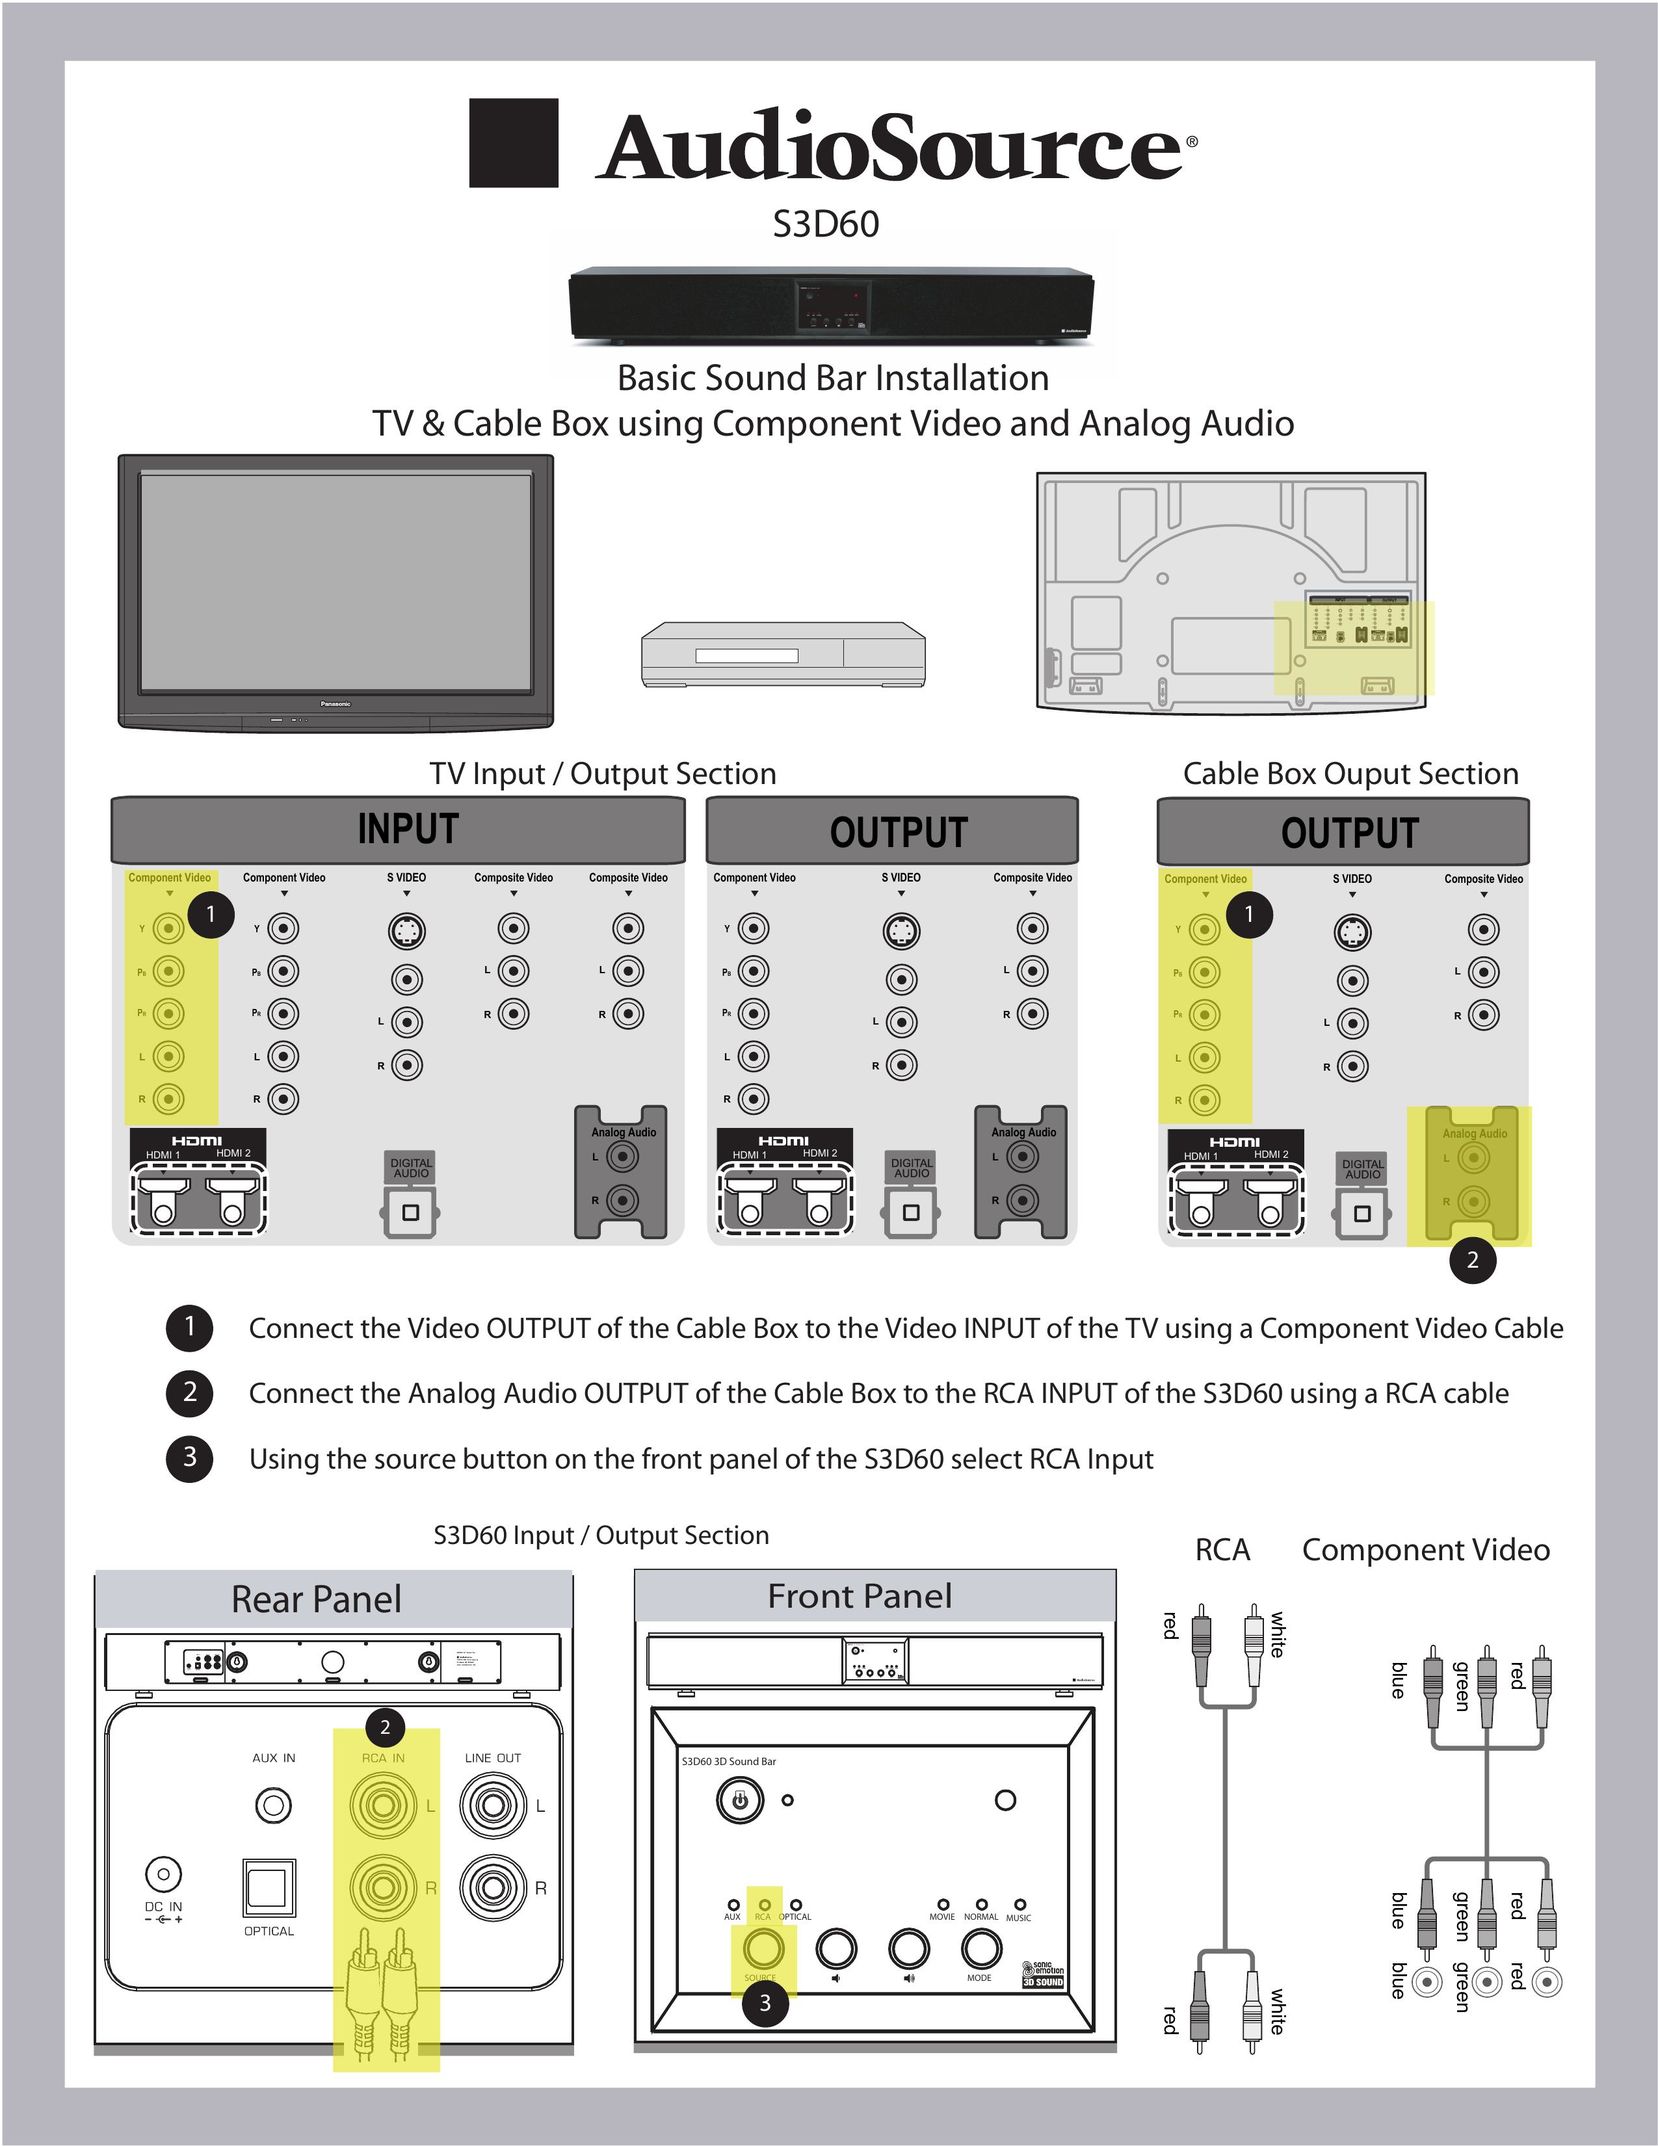 AudioSource S3D60 Cable Box User Manual (Page 1)